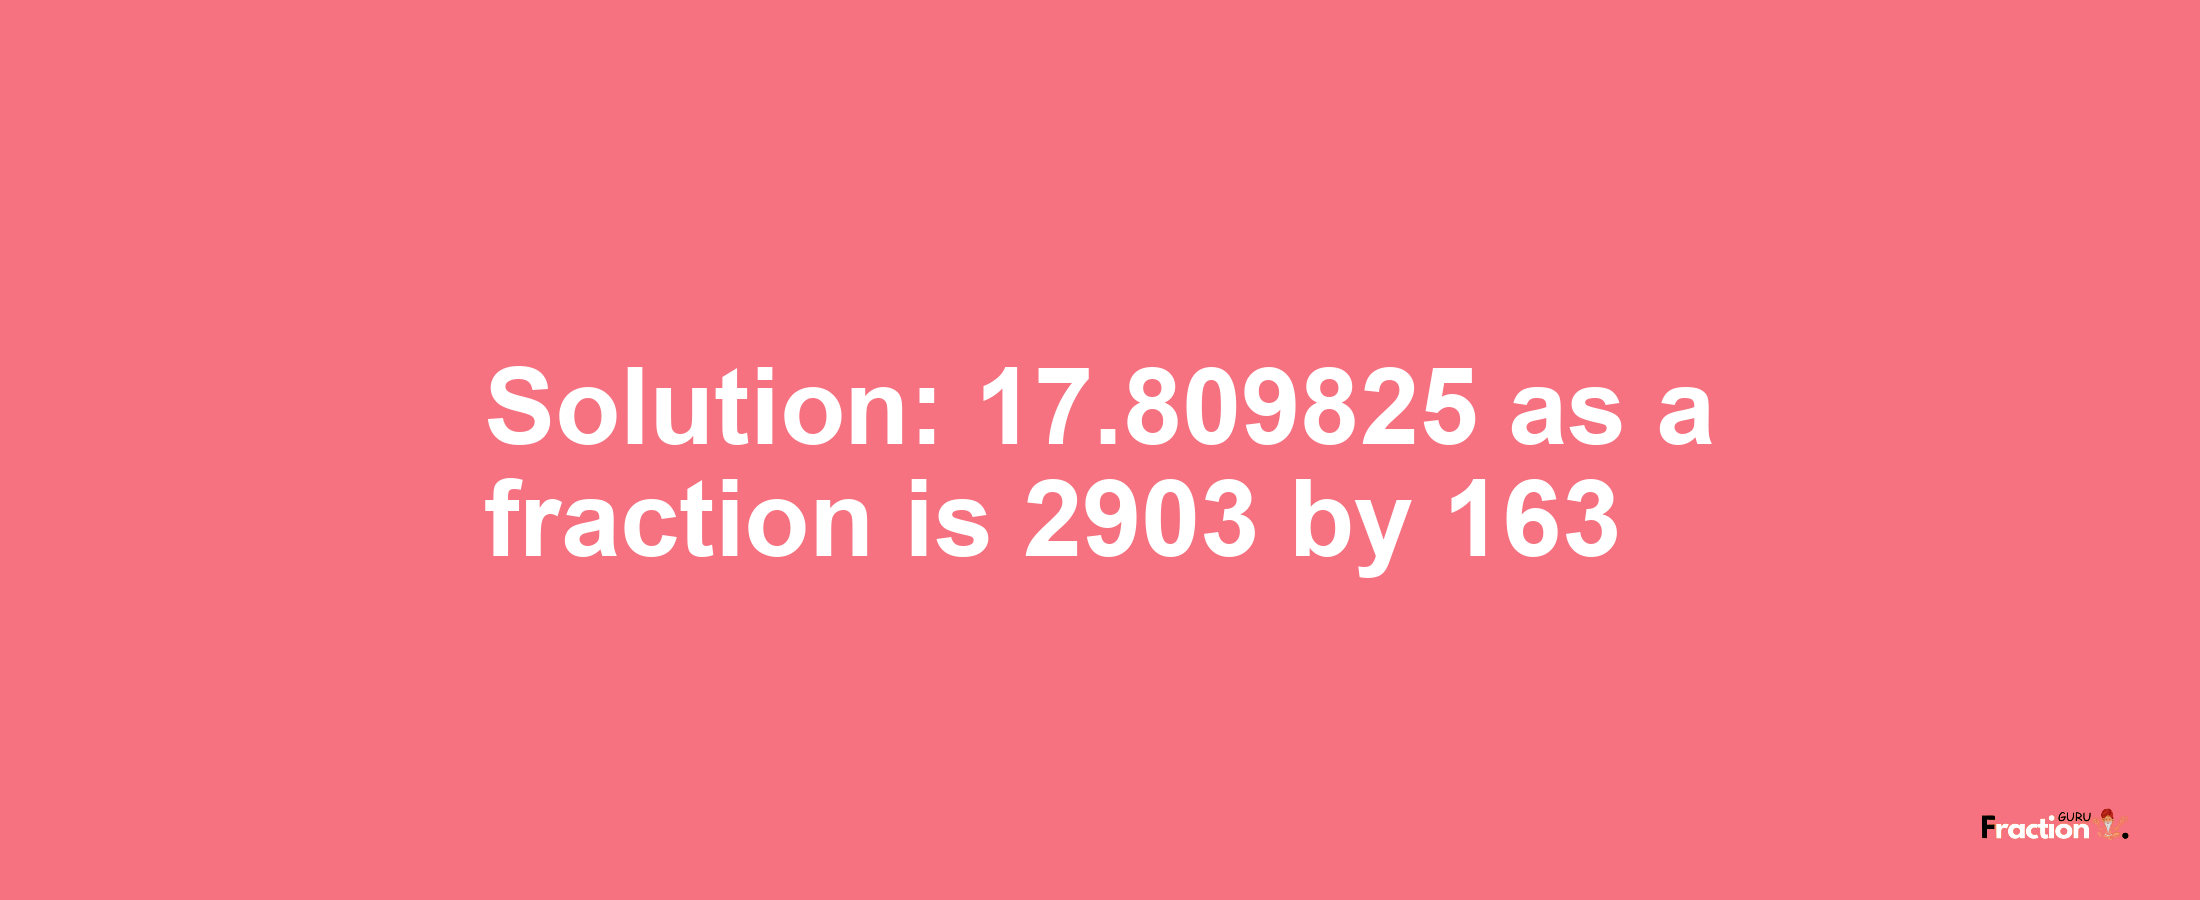 Solution:17.809825 as a fraction is 2903/163